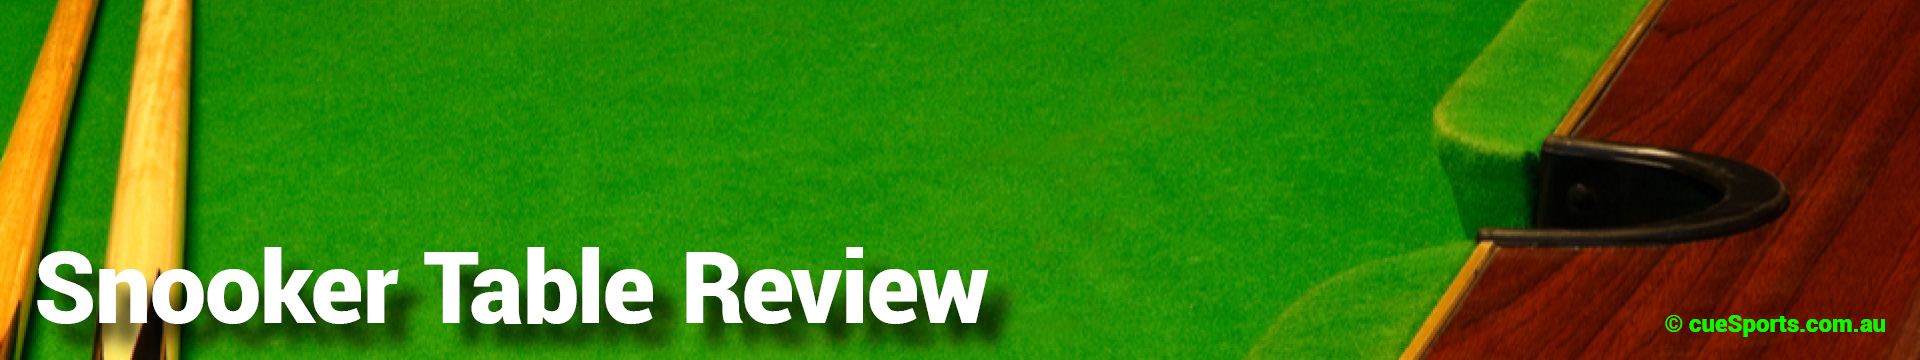 Snooker Table Review